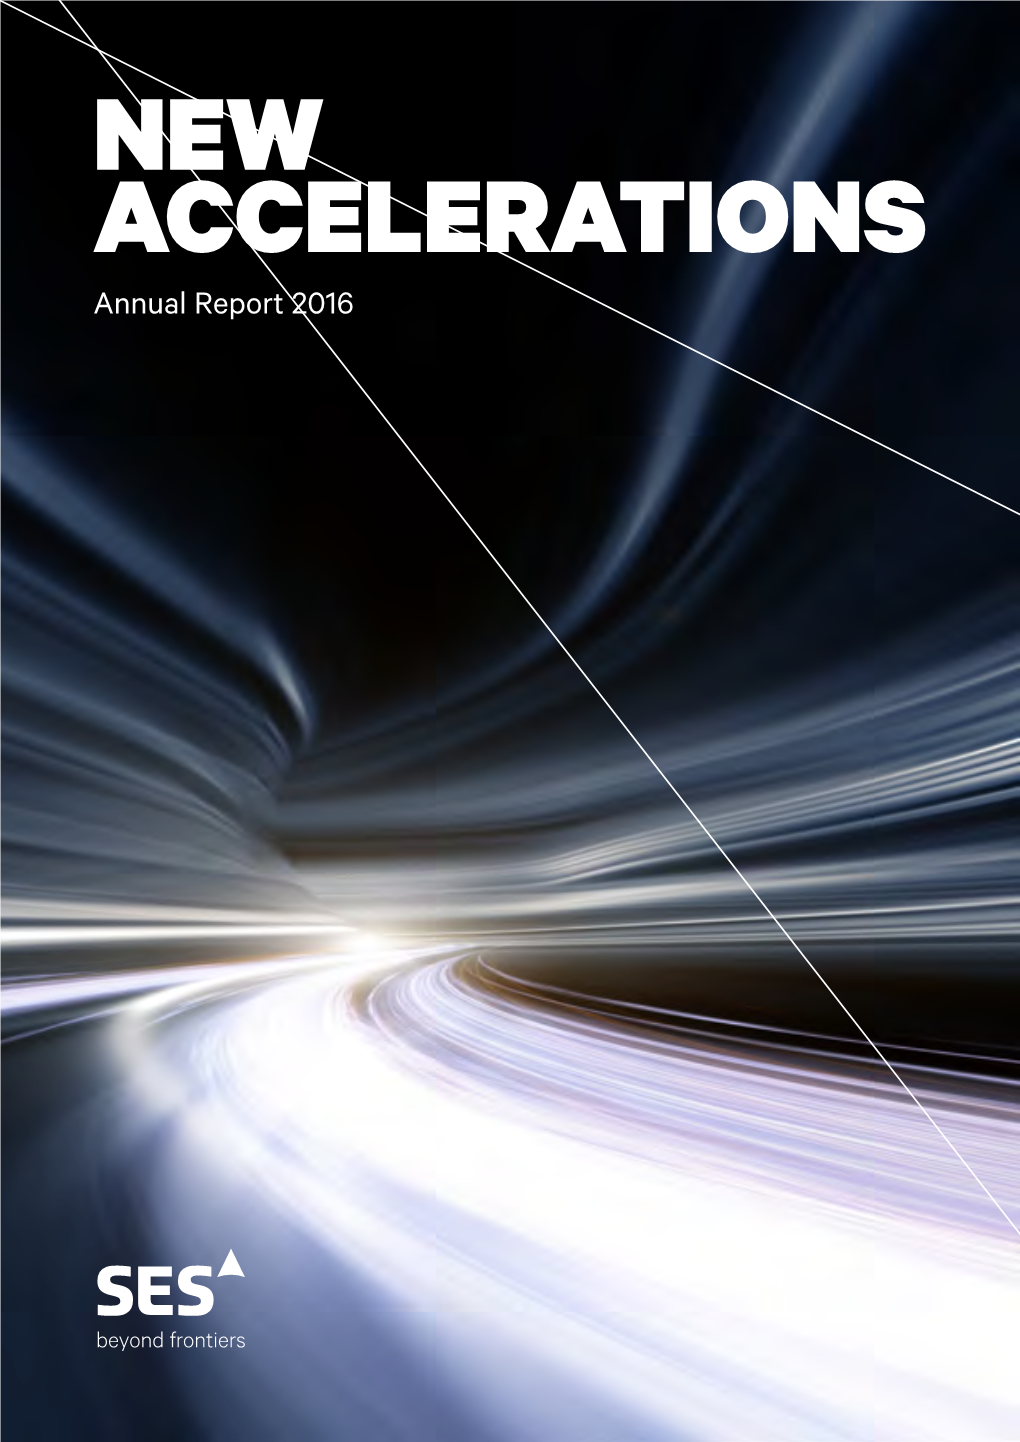 NEW ACCELERATIONS Annual Report 2016